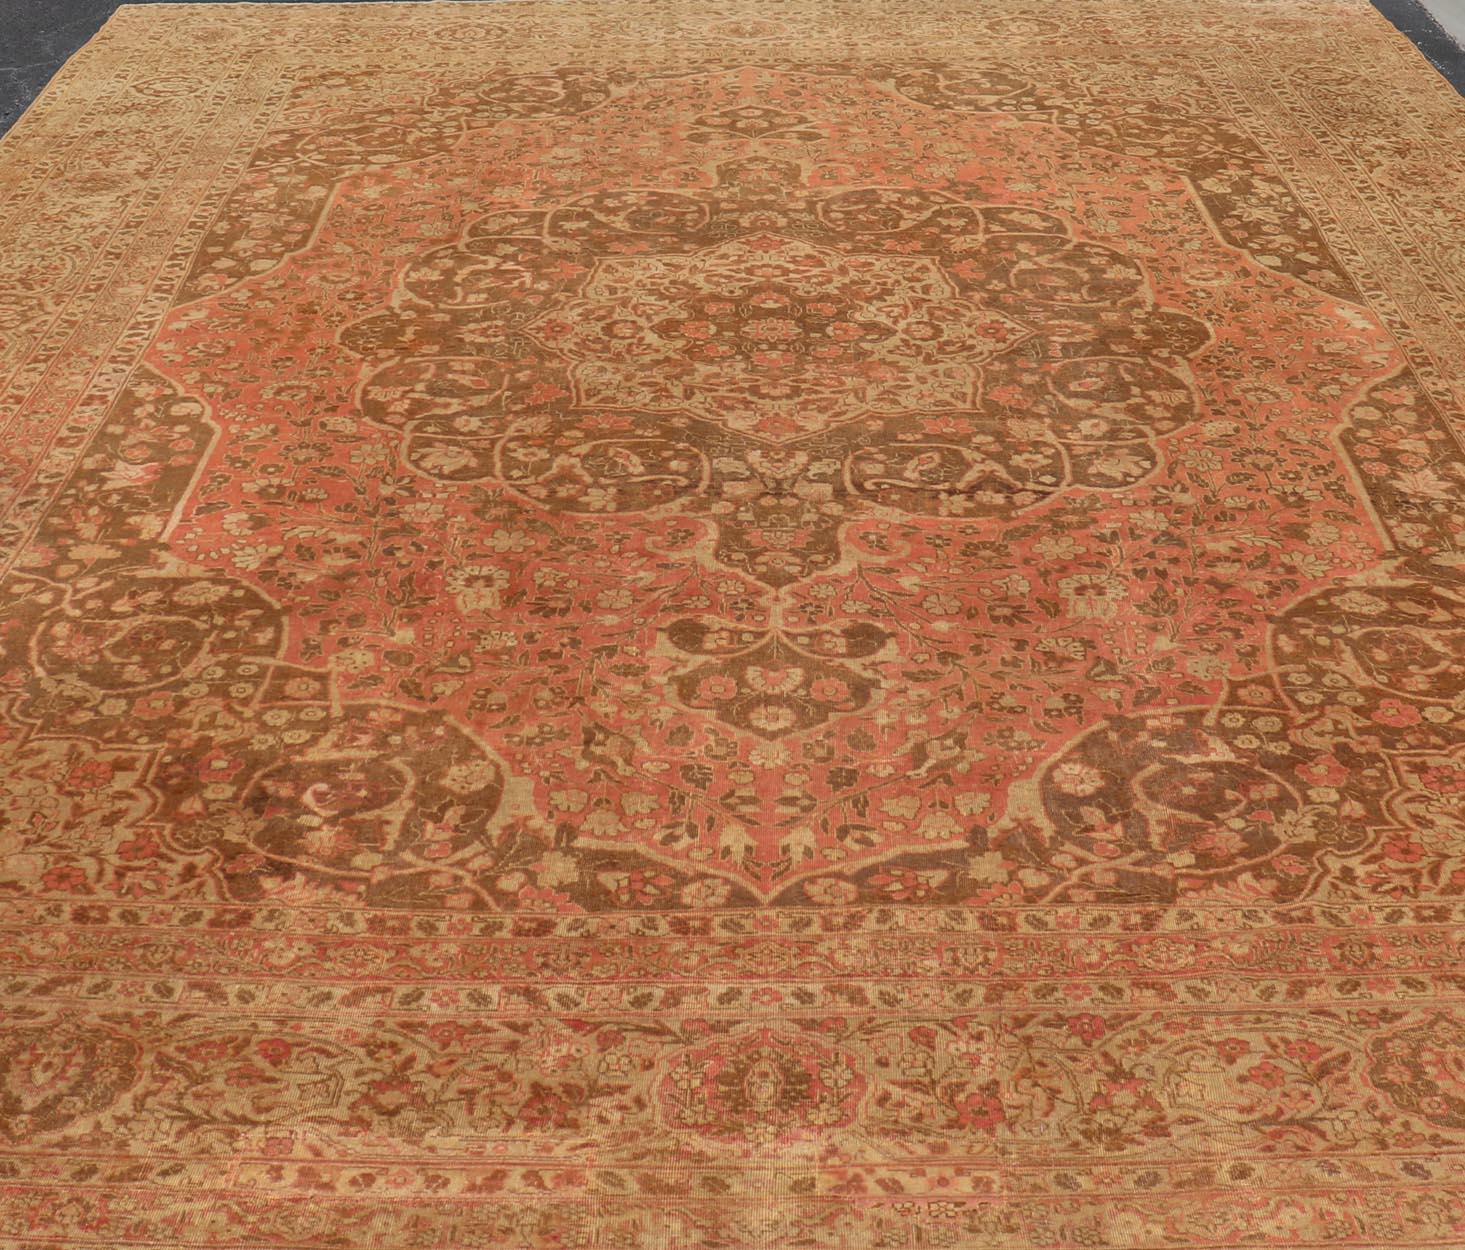 Antique Medallion Tabriz Carpet in Pink, Light Brown, Camel, Taupe, and Salmon For Sale 4